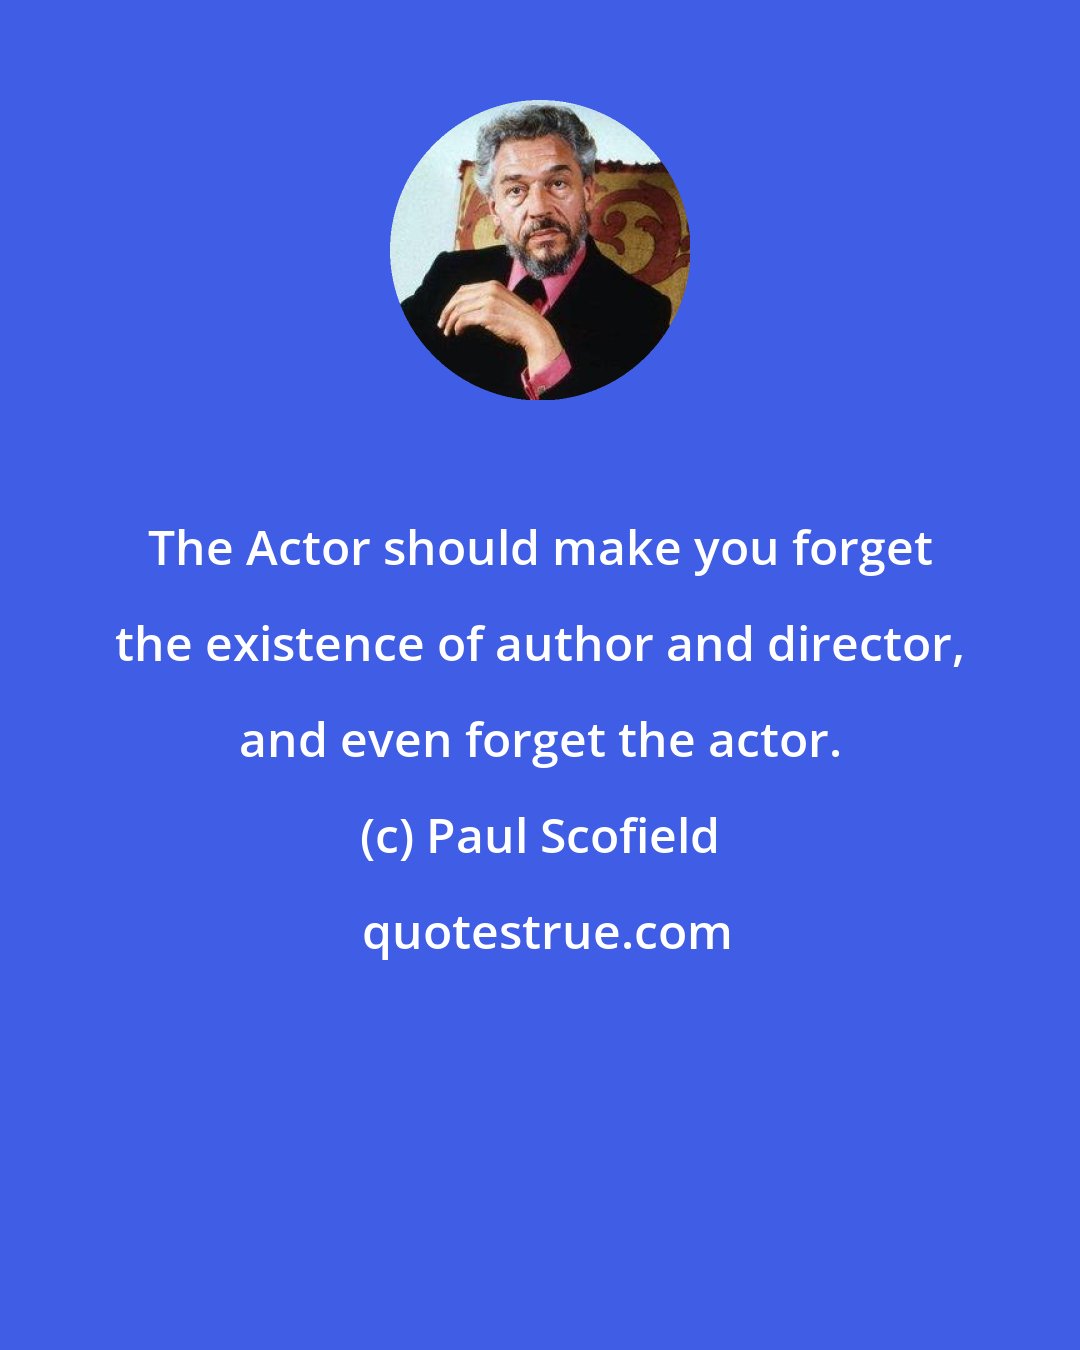 Paul Scofield: The Actor should make you forget the existence of author and director, and even forget the actor.